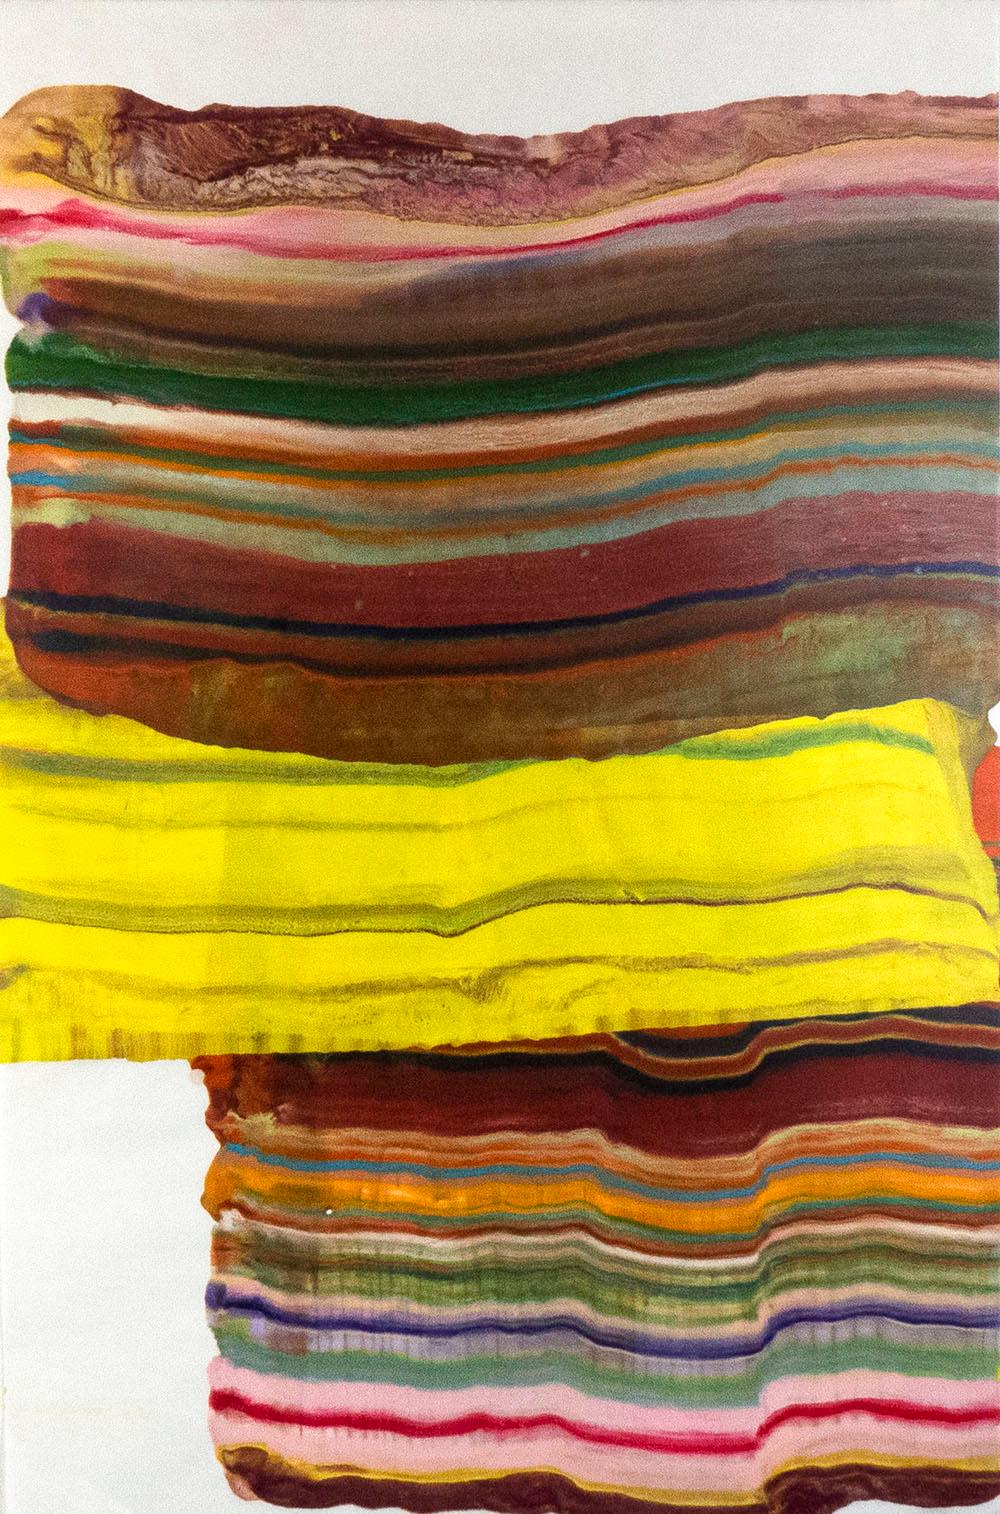 Laura Moriarty Abstract Print - Ex Uno Plures Eight, Bright Neon Yellow, Brown, Magenta, Pink Encaustic Monotype